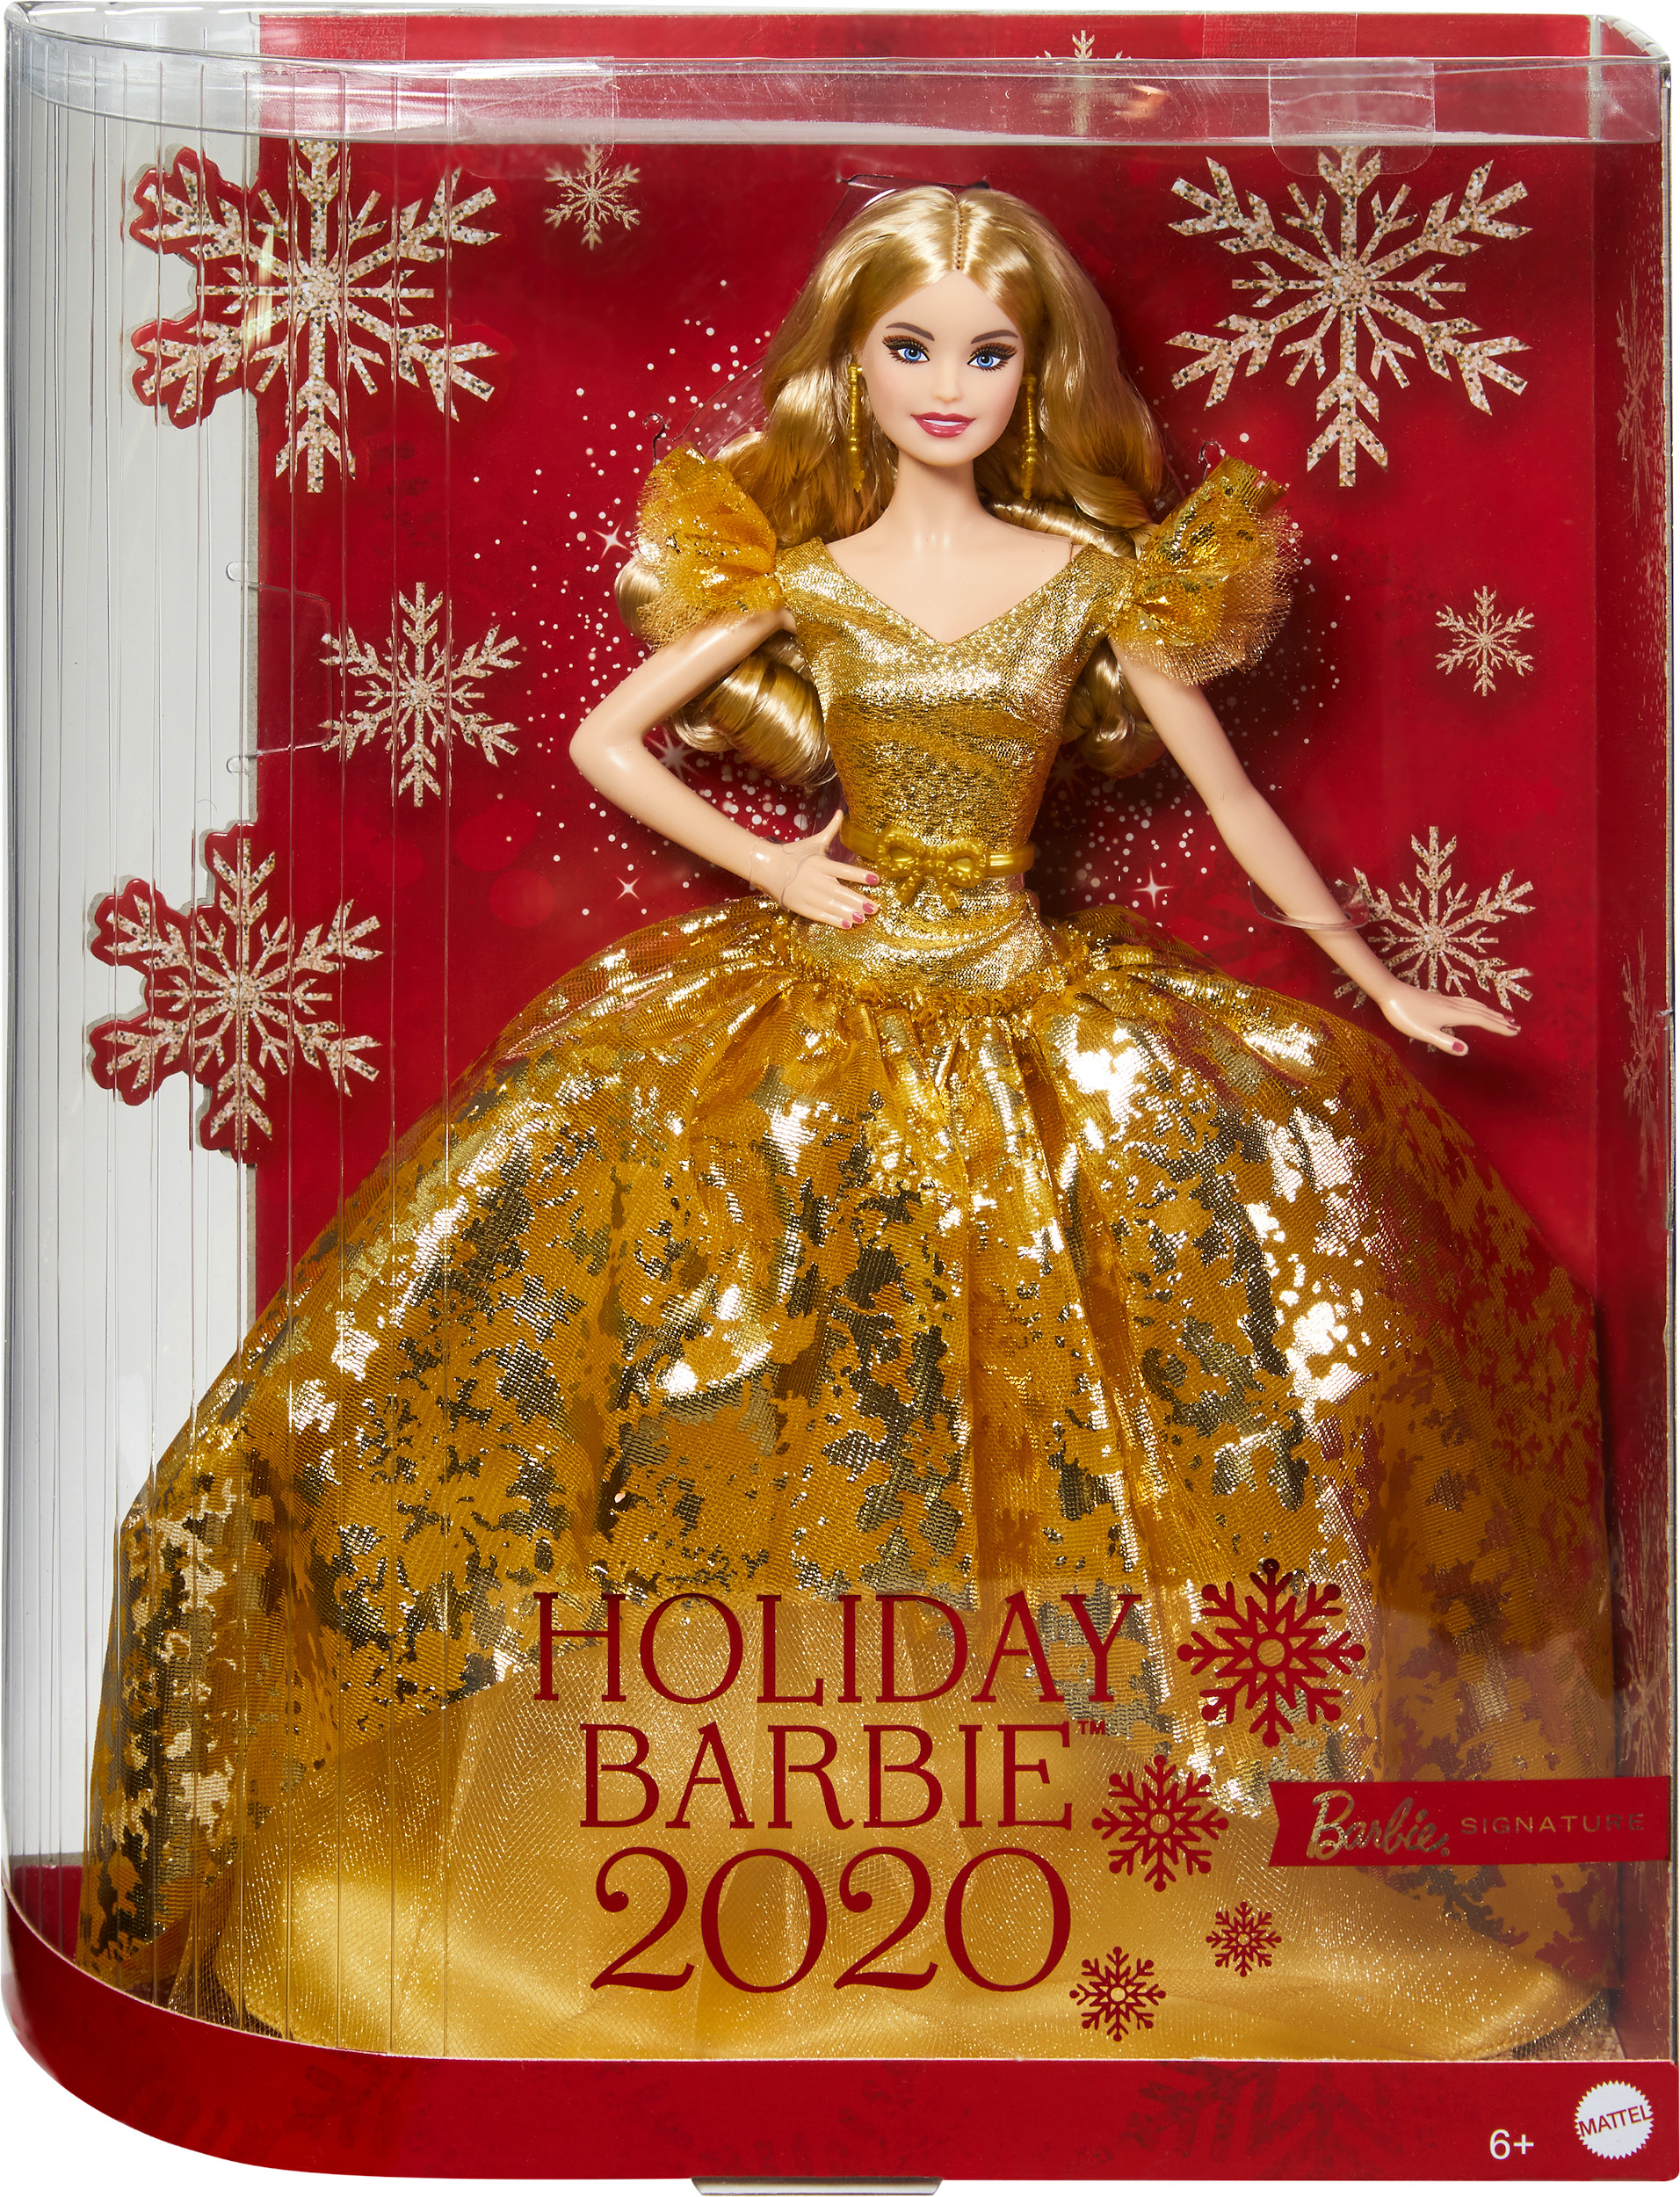 Barbie Signature 2020 Holiday Barbie Doll (12-inch Blonde Long Hair) in Golden Gown - image 3 of 8